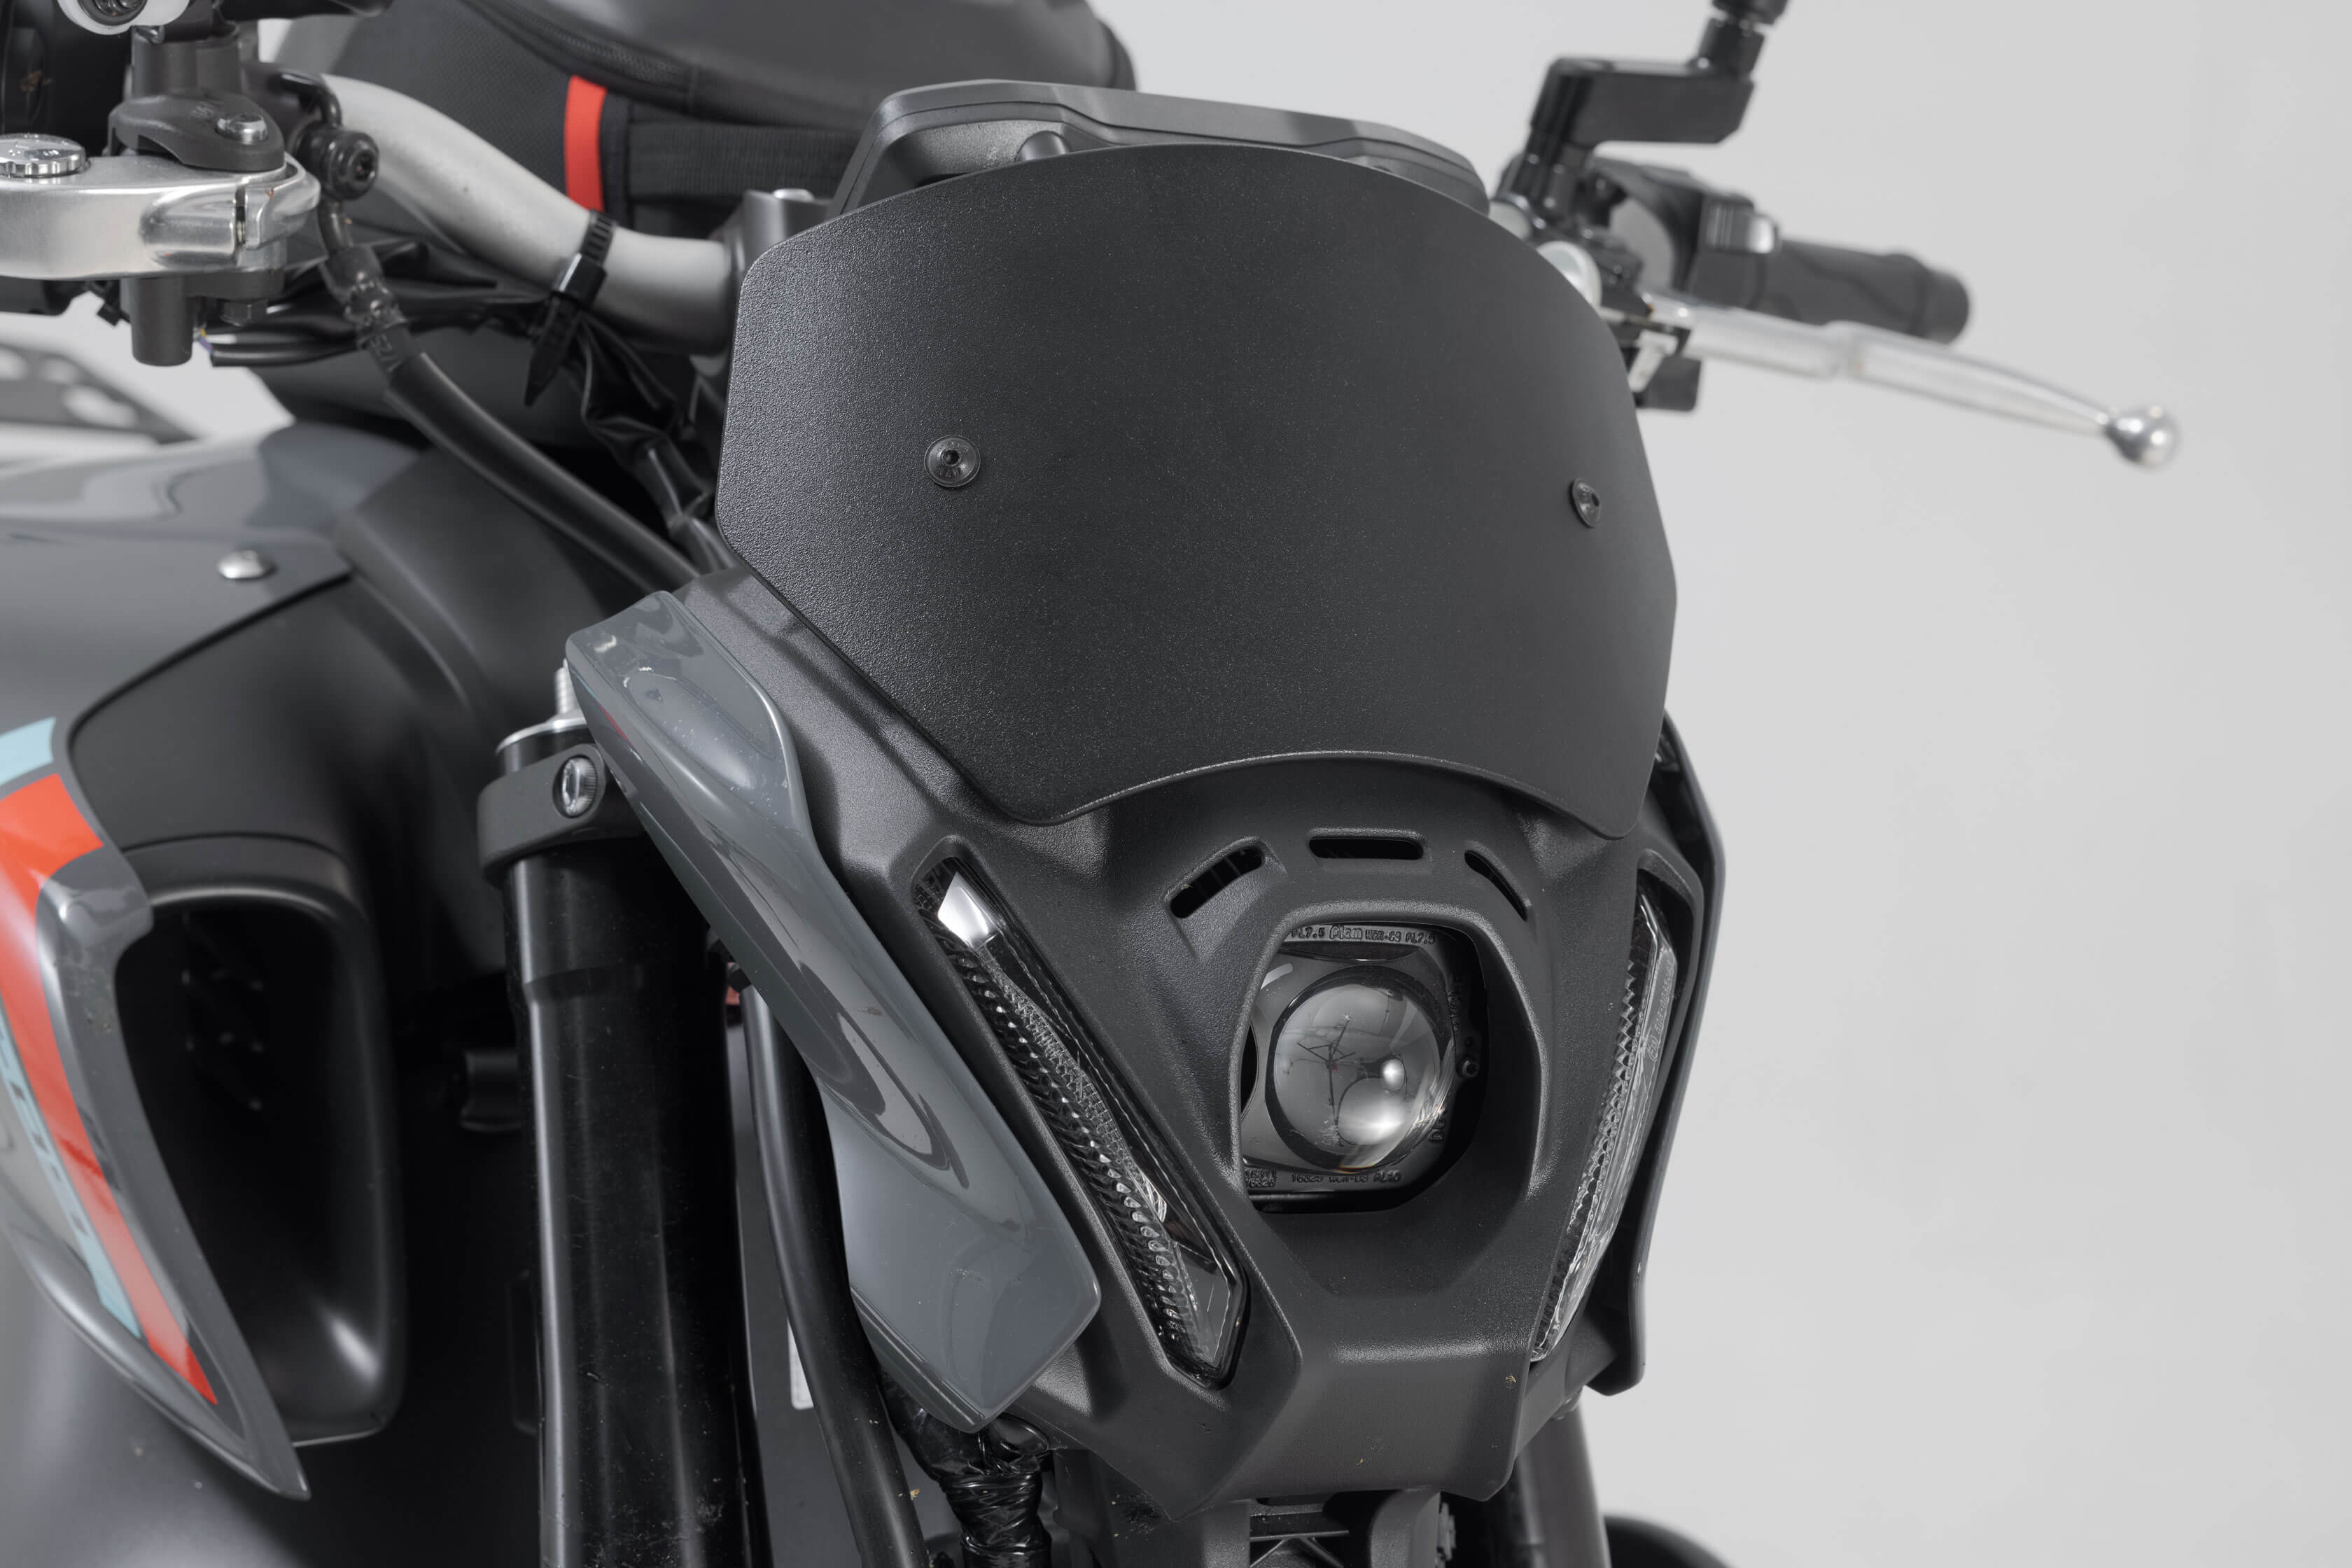 SW-MOTECH supplies accessories for the Yamaha MT-09 - SW-MOTECH